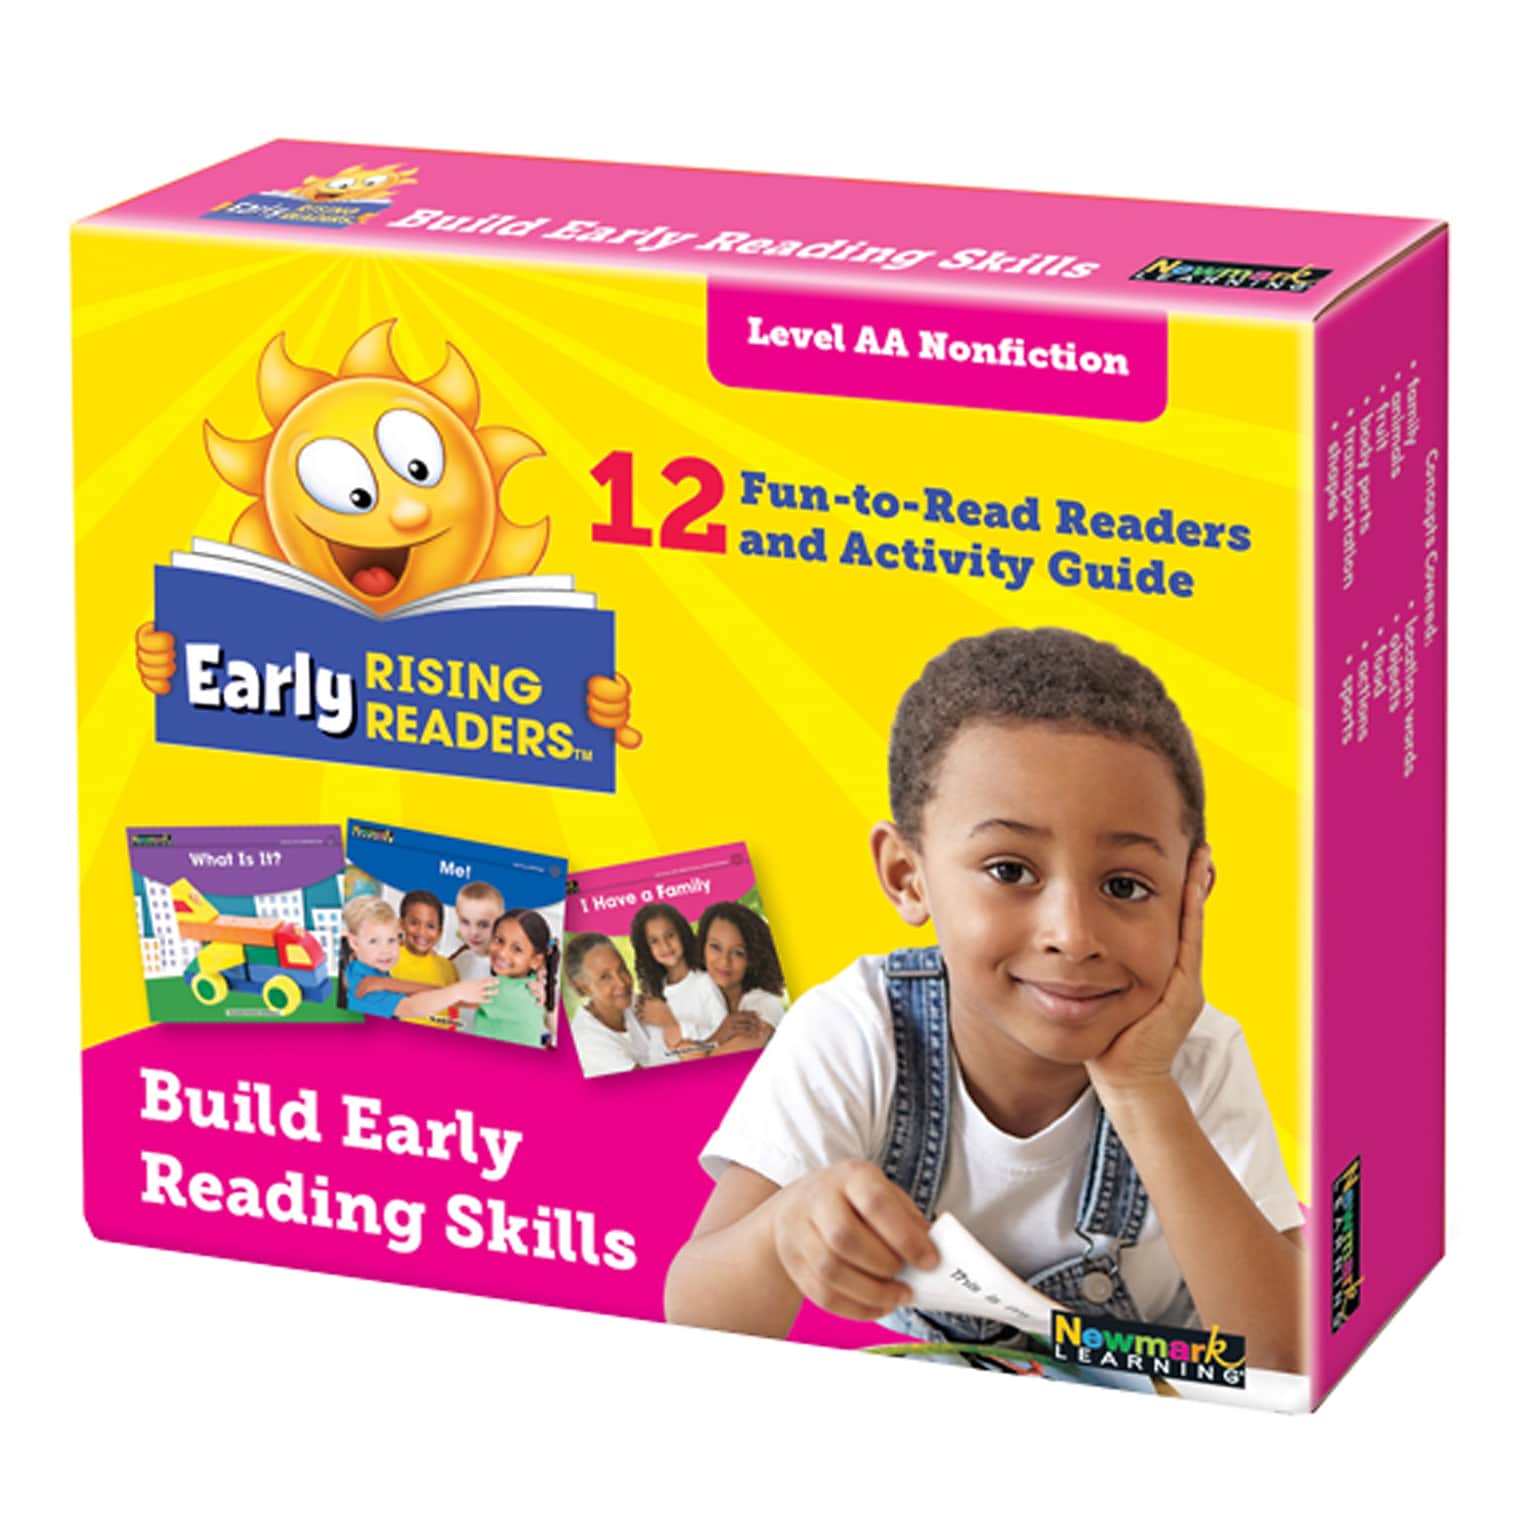 Early Rising Readers Set 1: Nonfiction, Level AA by Newmark Learning, Set of 12 Paperback Readers (9781478872337)